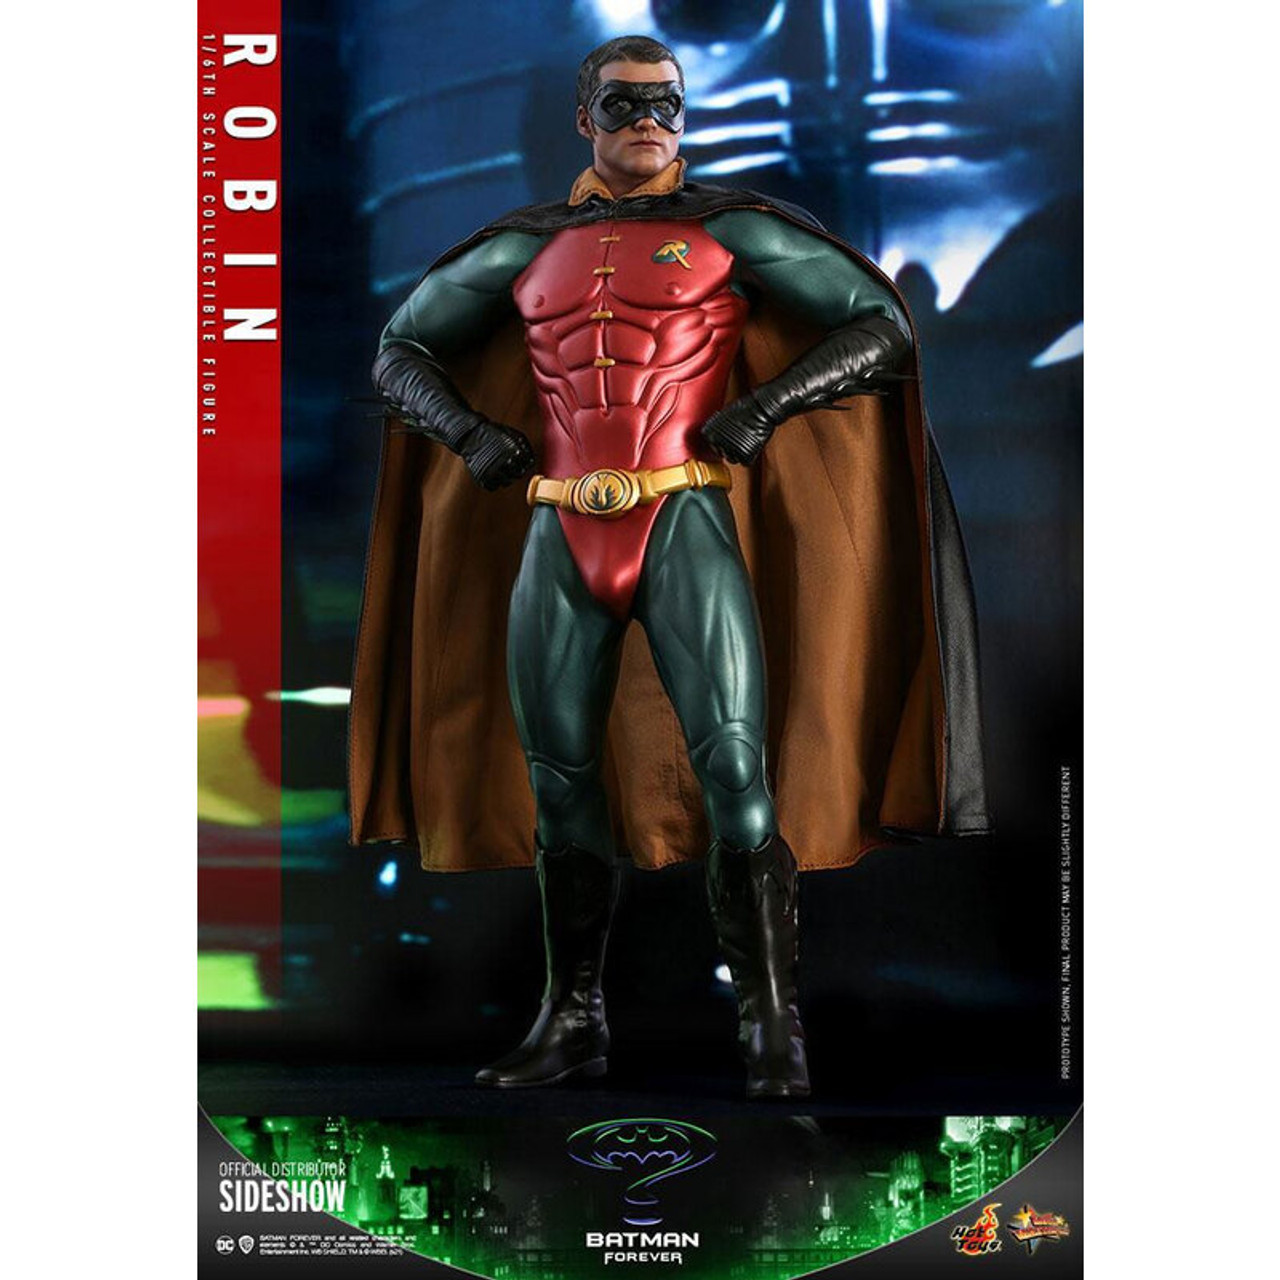 Batman Sixth Scale Collectible Figure by Hot Toys